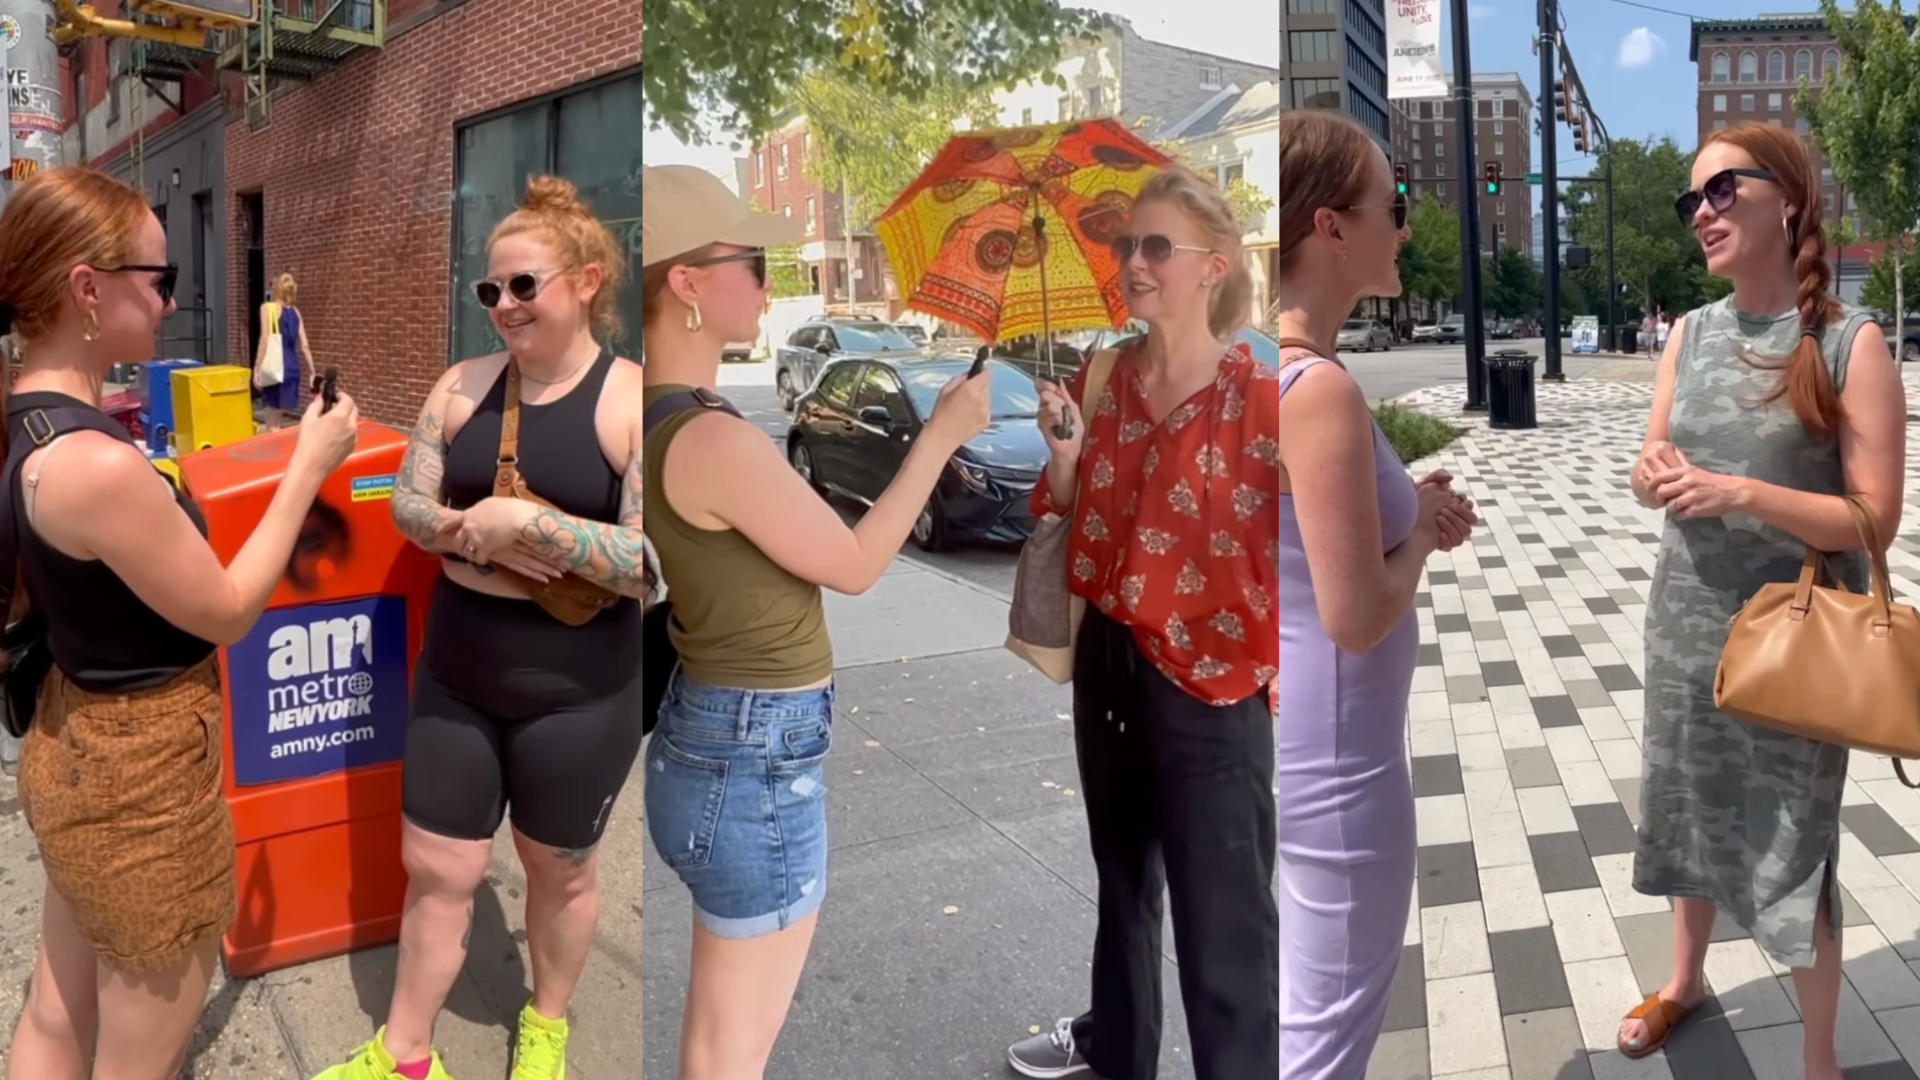 Introducing The New Series: “Redheads on the Street”